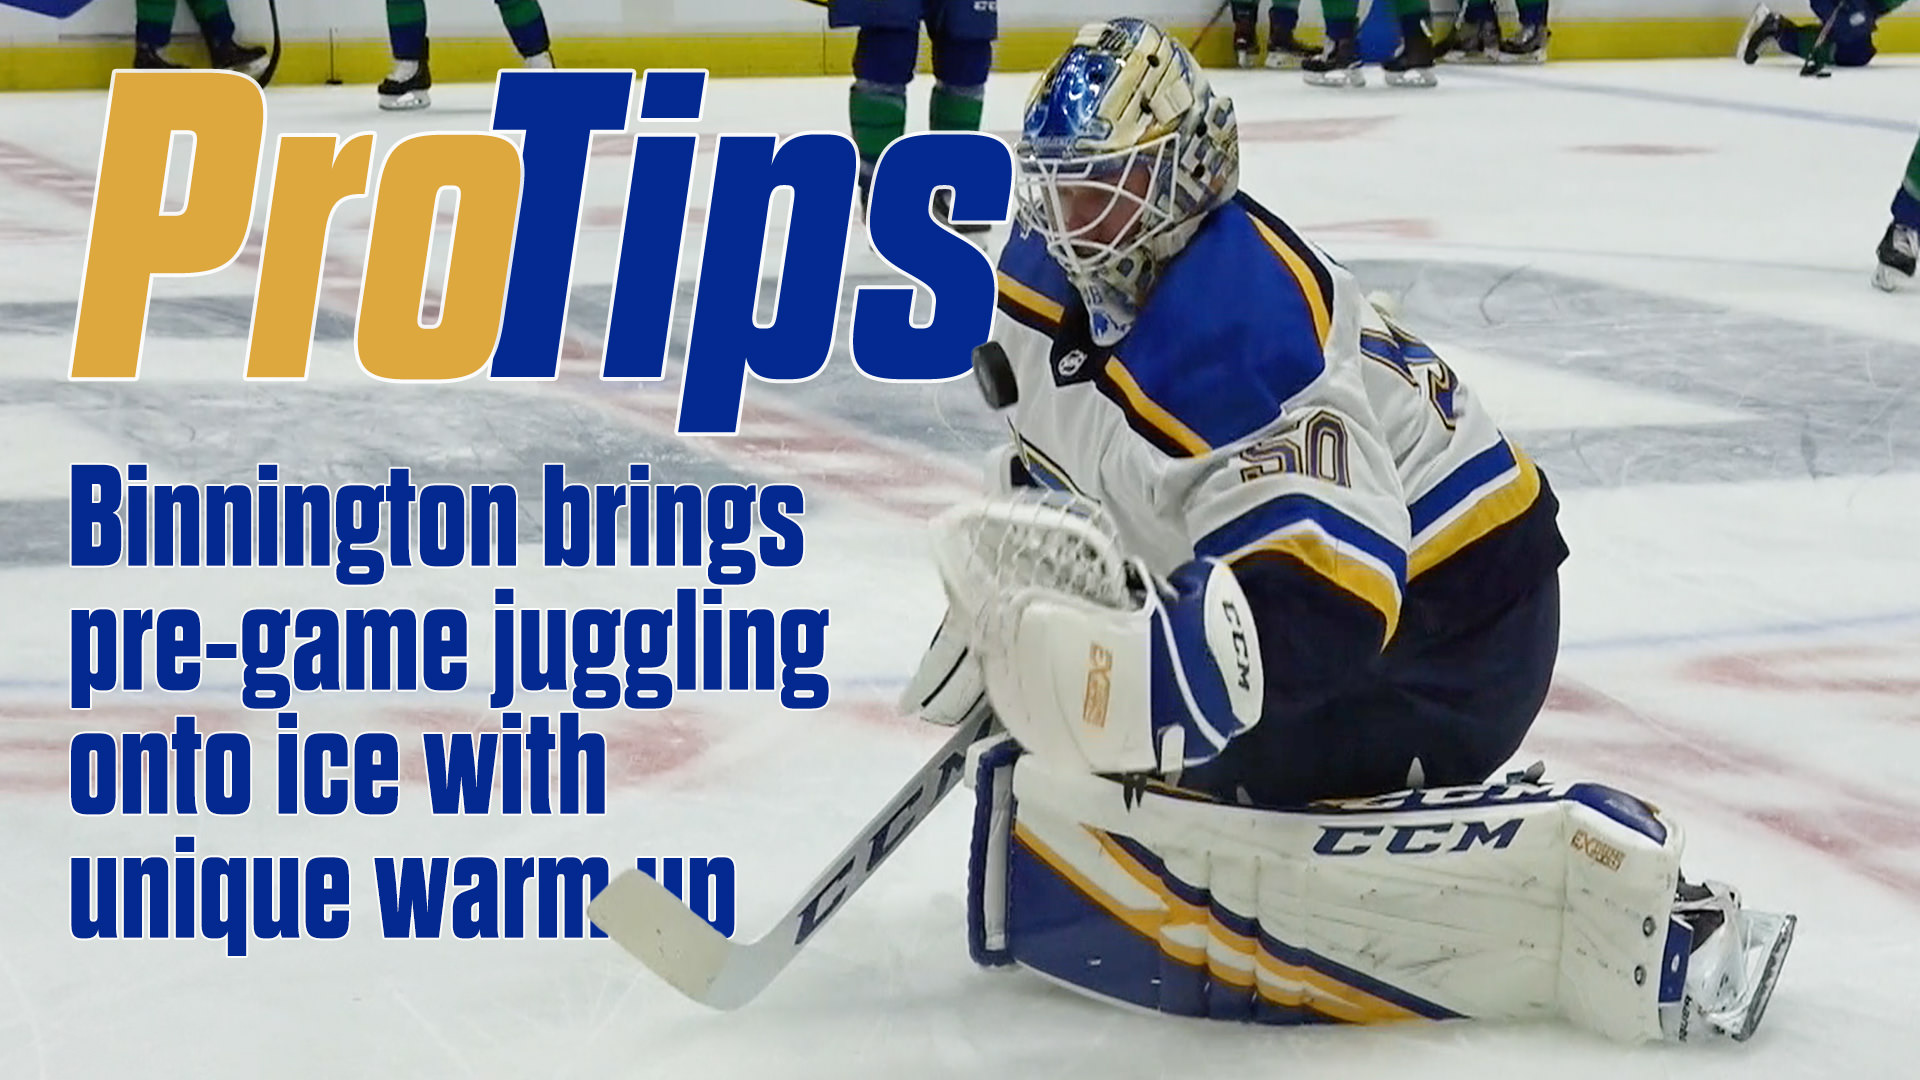 Pro-Tips: Binnington brings pre-game juggling onto ice with unique warm up